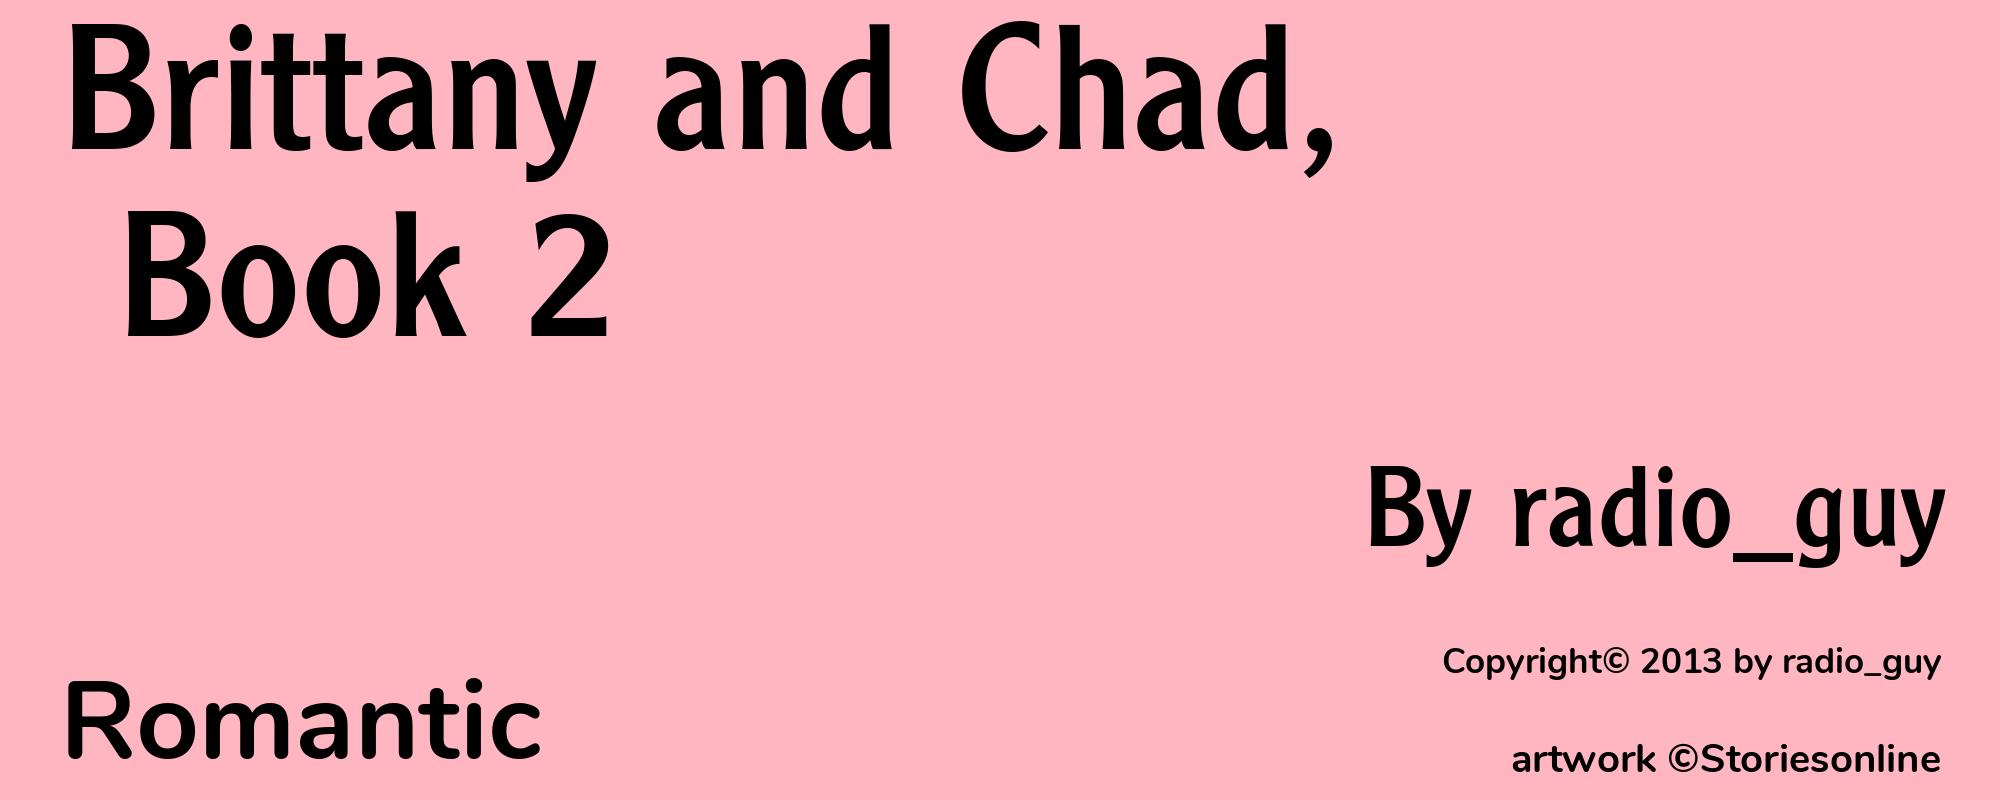 Brittany and Chad, Book 2 - Cover